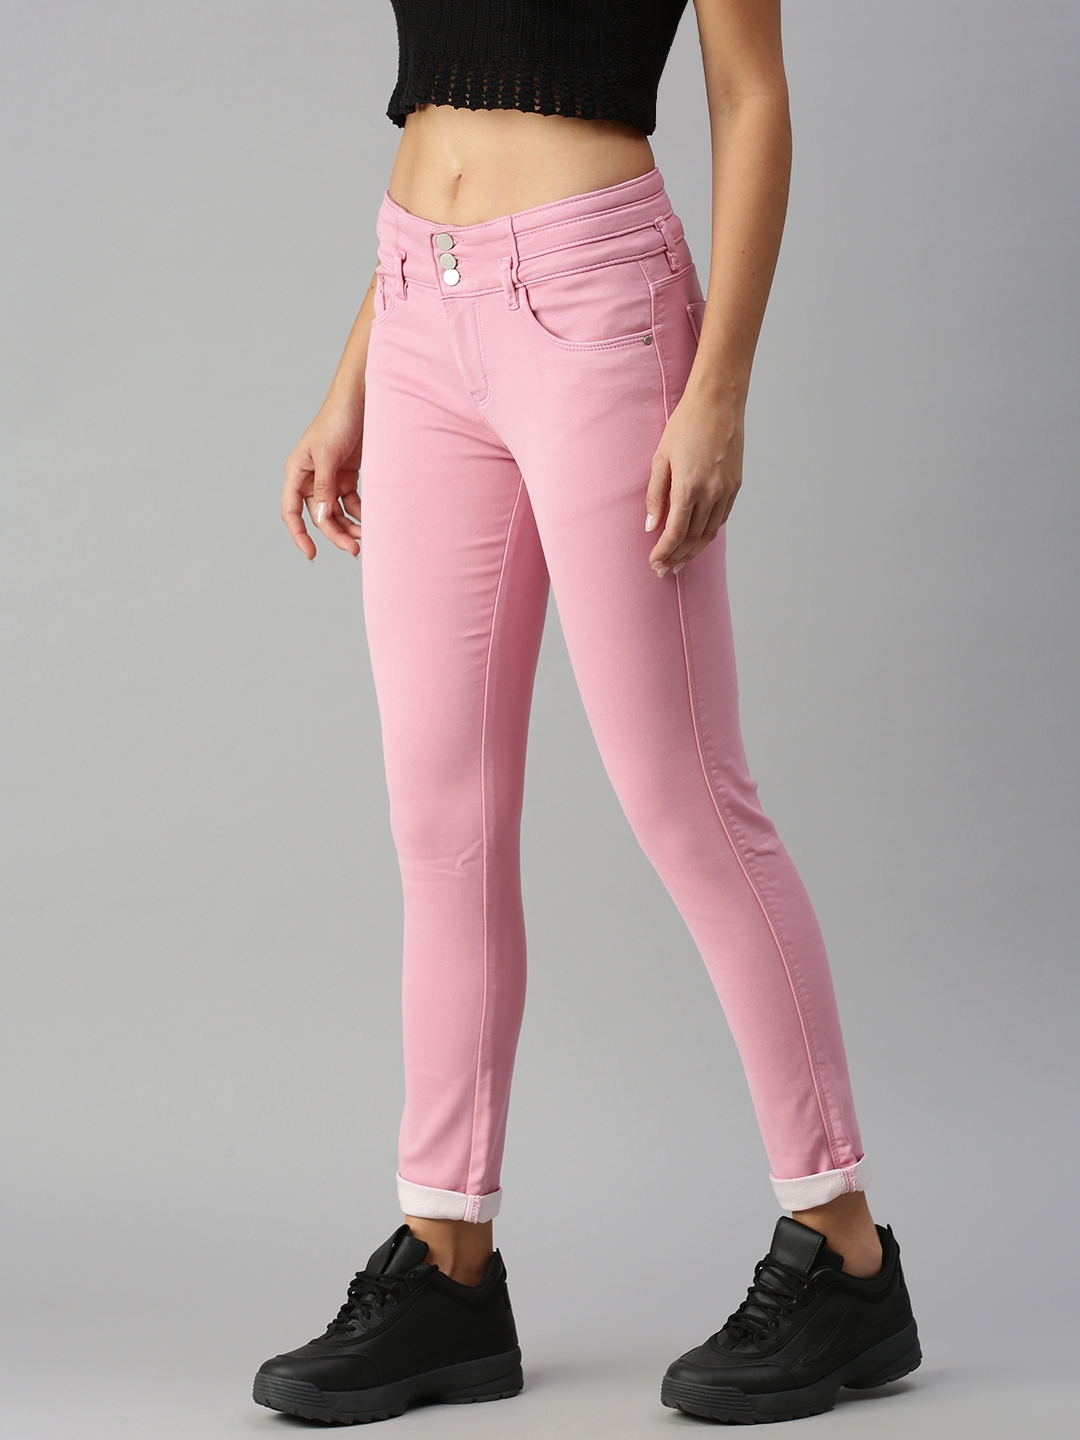 Judy Blue Pink Cargo Jeans – The Nines